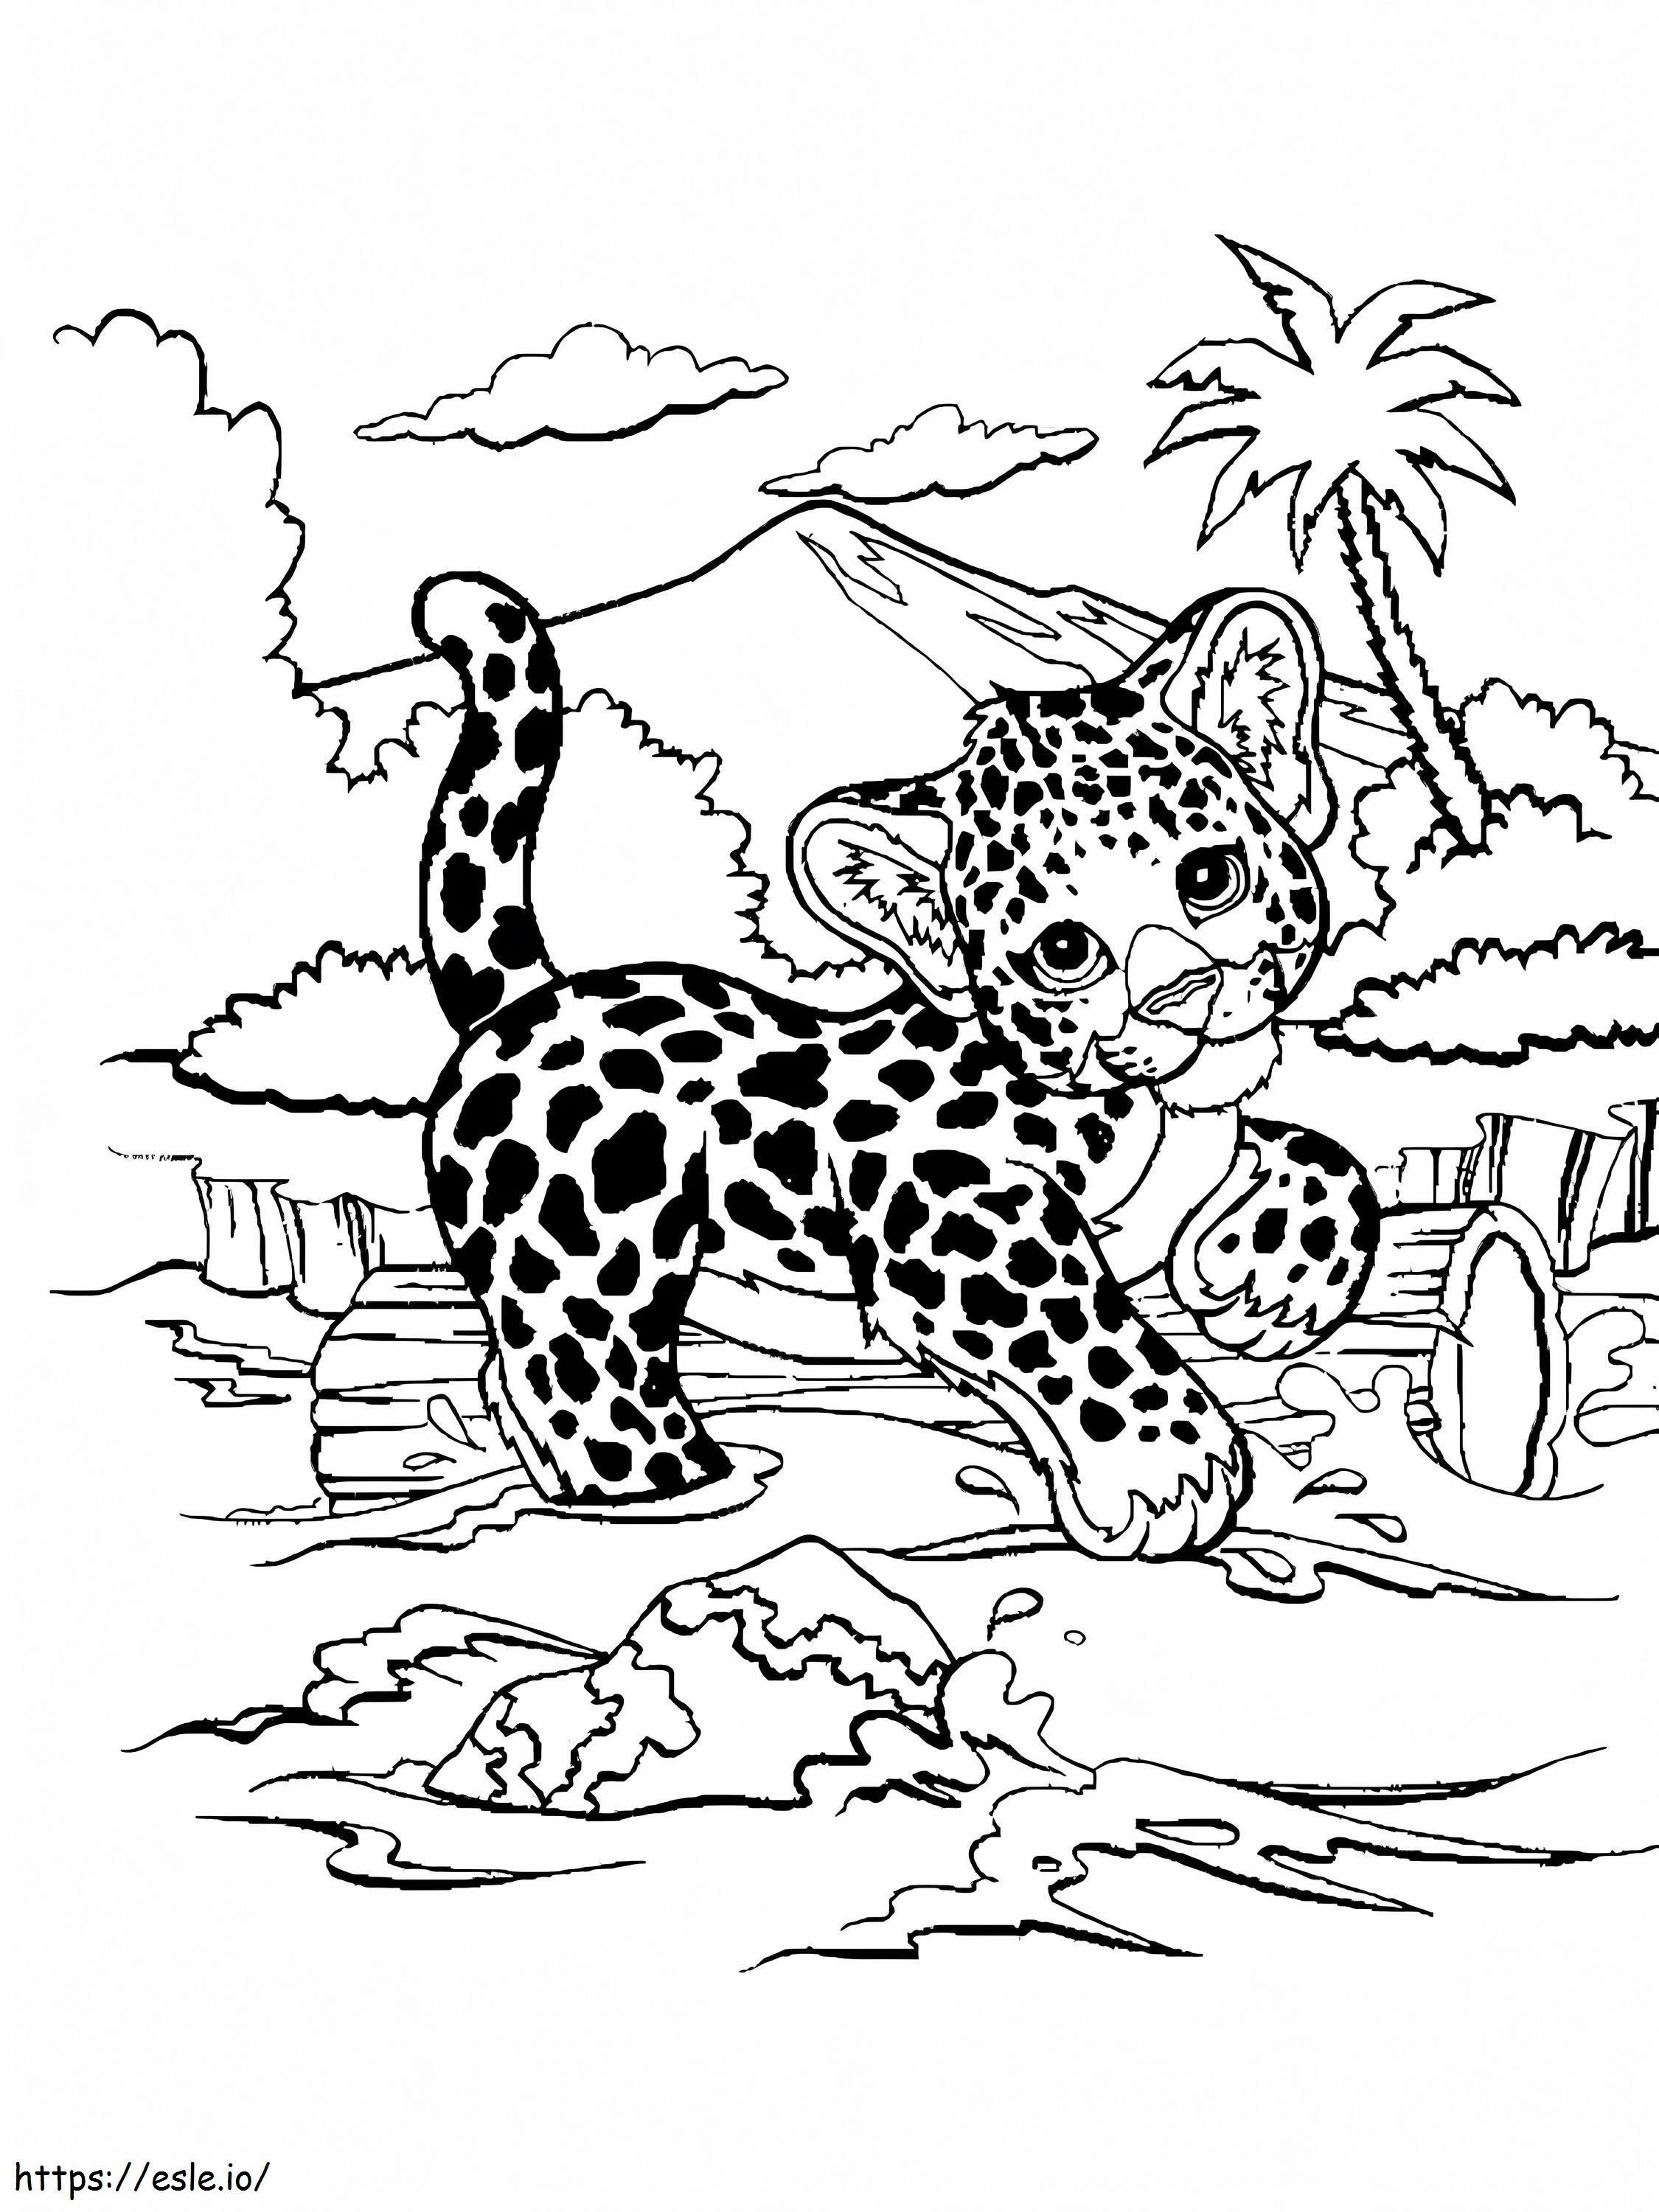 Cheetah In The River coloring page